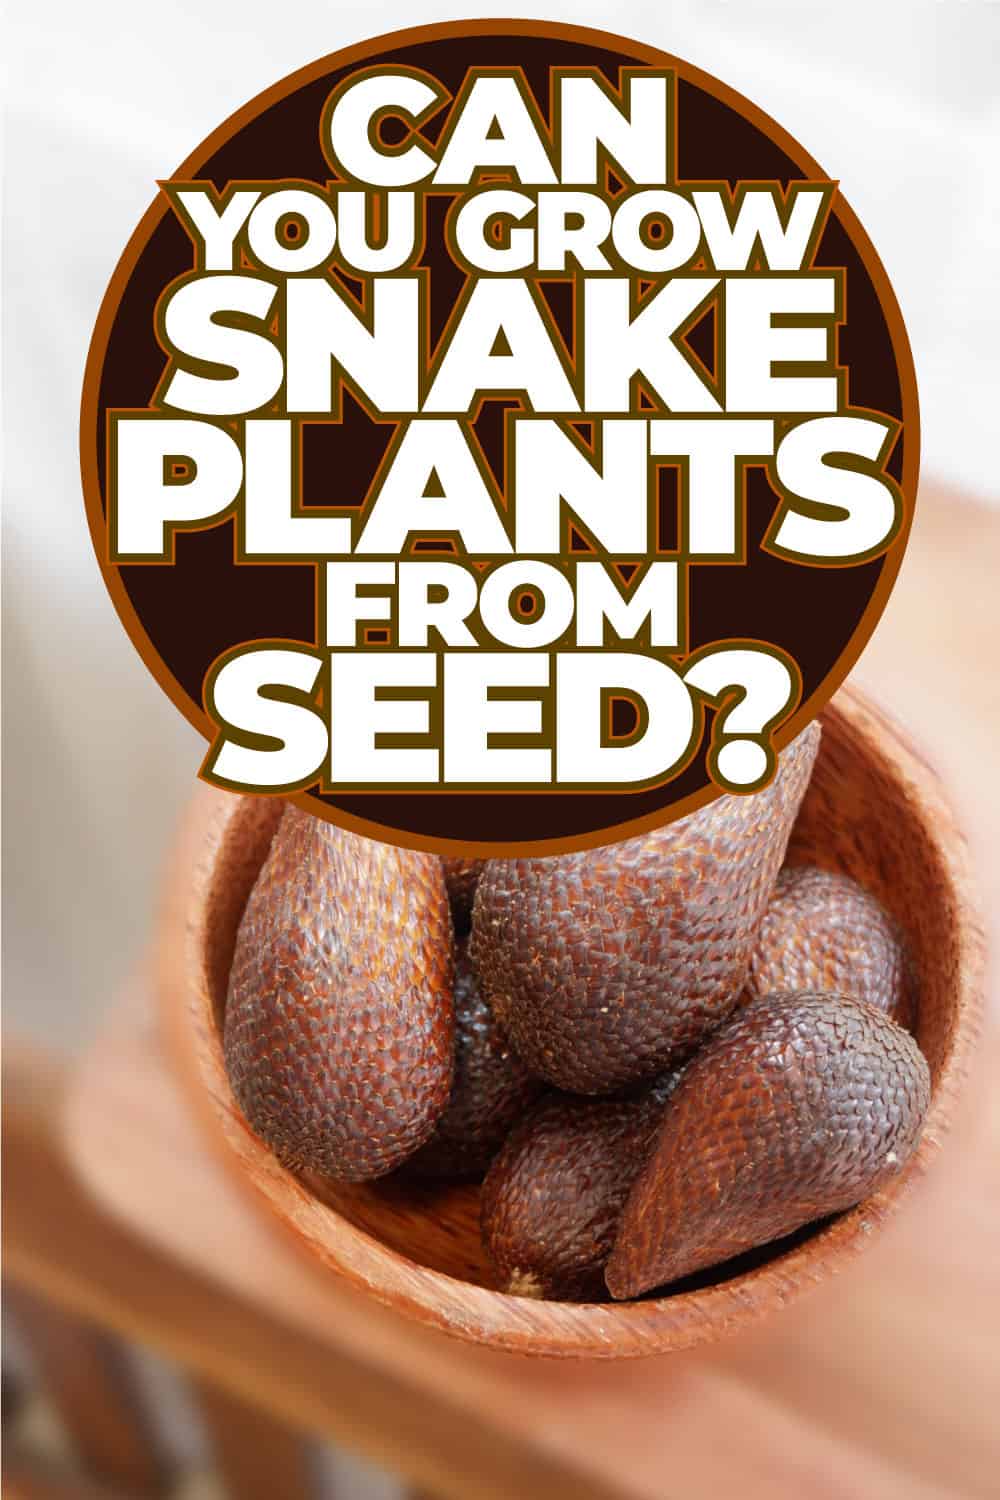 Can You Grow Snake Plants From Seed Here's What You Need To Know